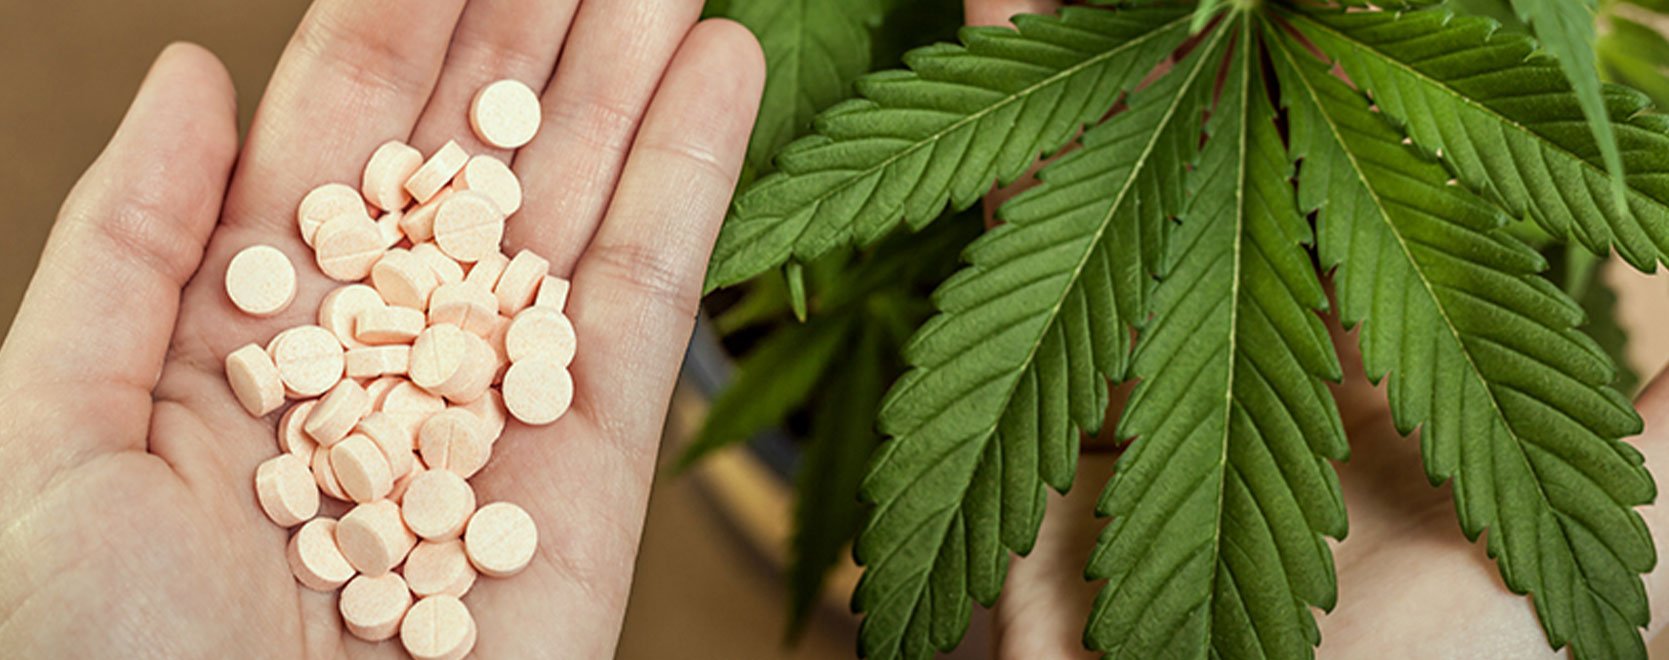 Could Cannabis Be Used Instead Of Opioids?